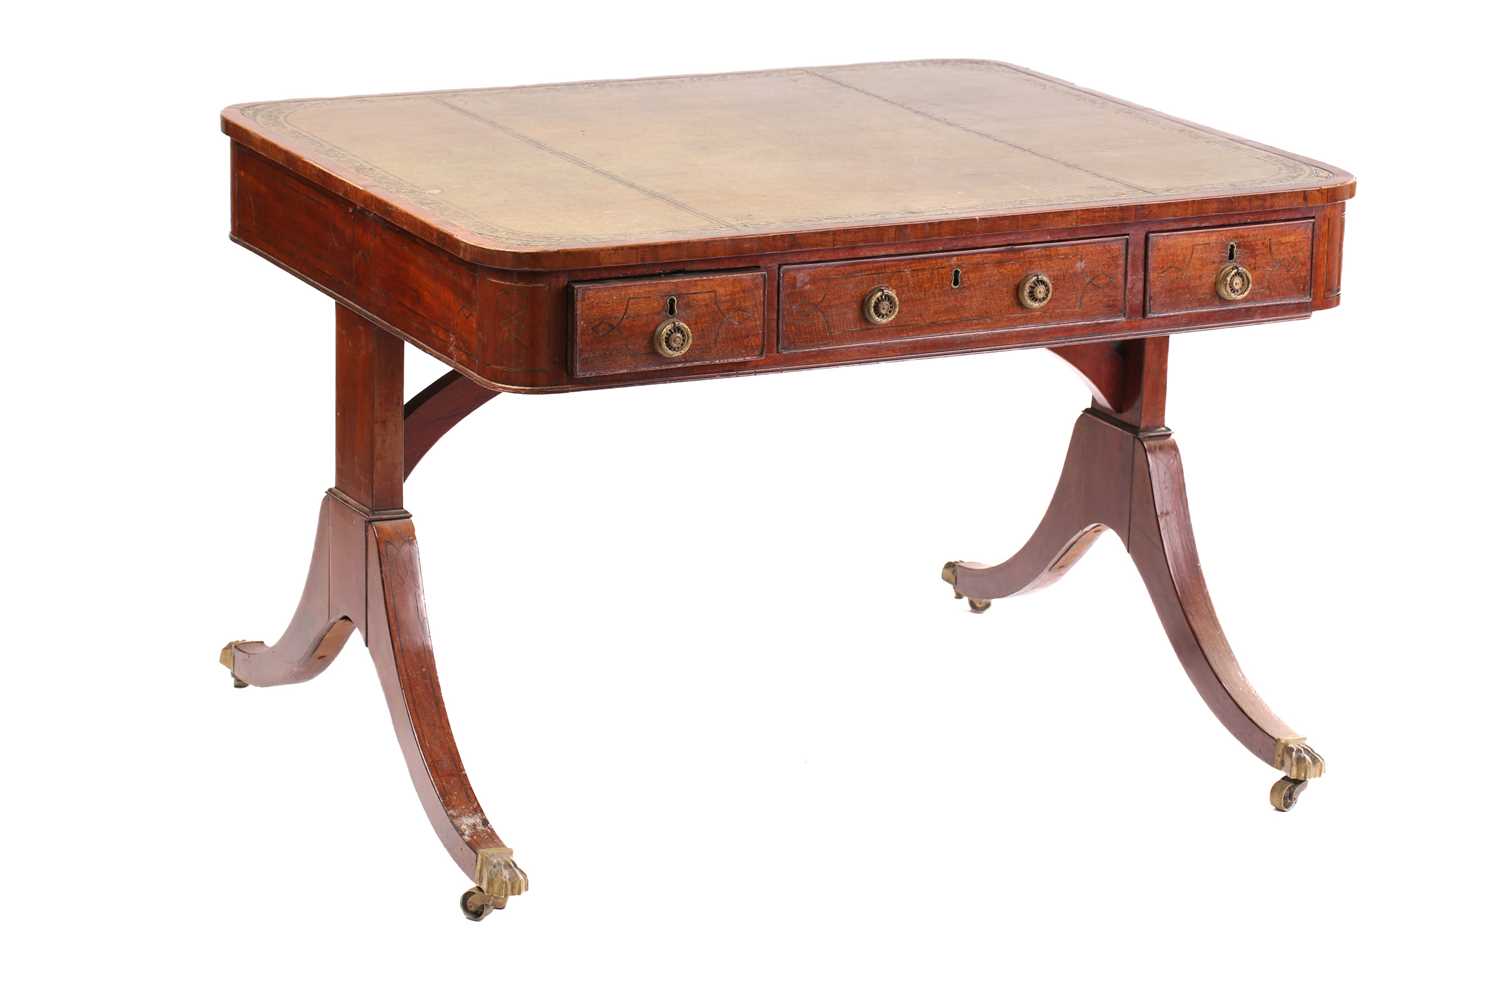 An unusual George IV ebony strung library table with crossbanded and tooled leather inset top with - Image 4 of 5